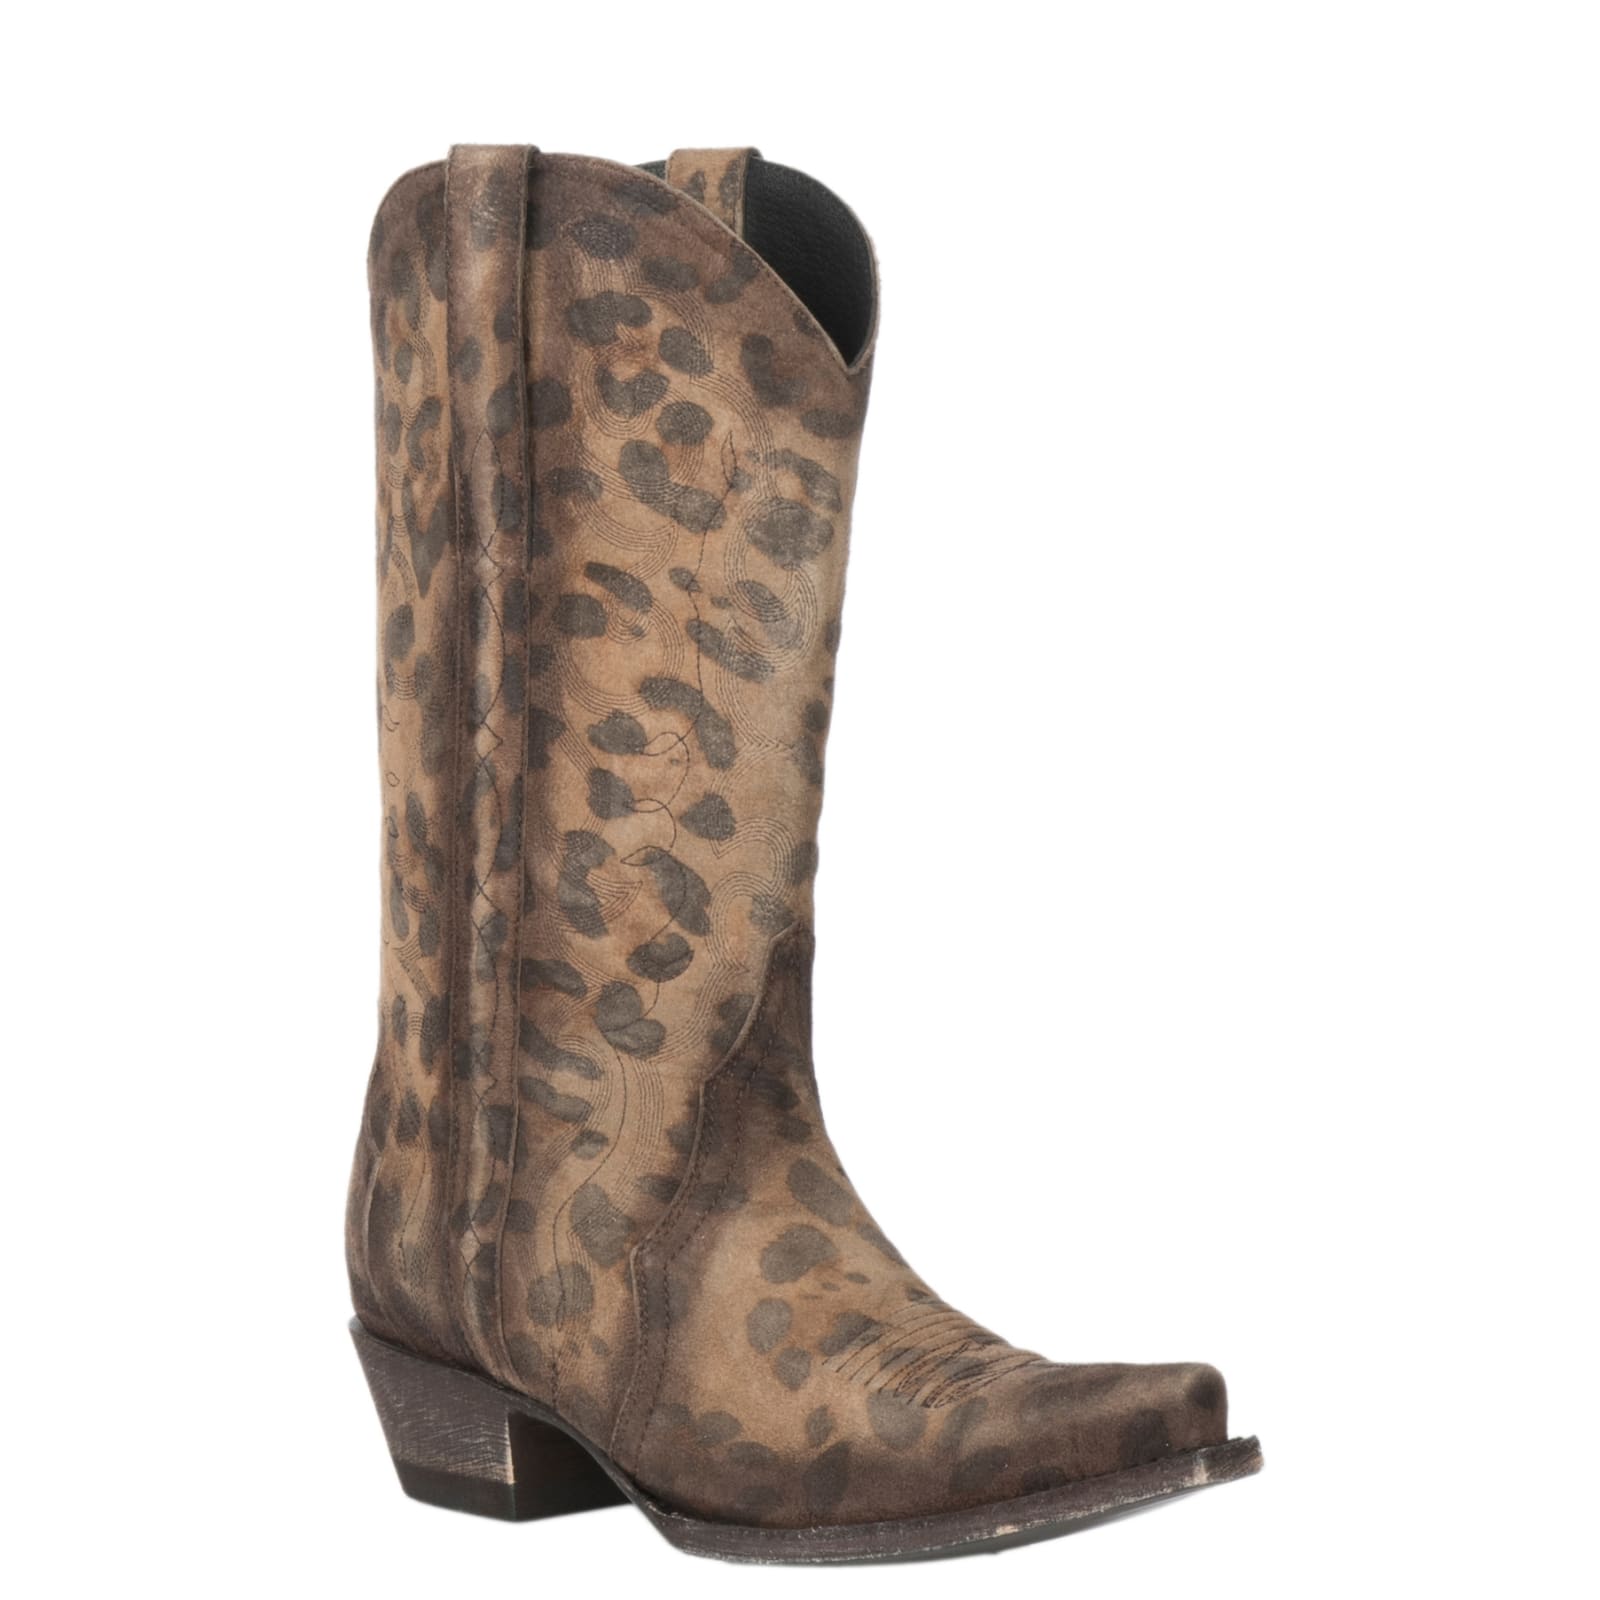 Honey Leopard Print Triad Snip Toe Cowboy Boots available at Cavenders